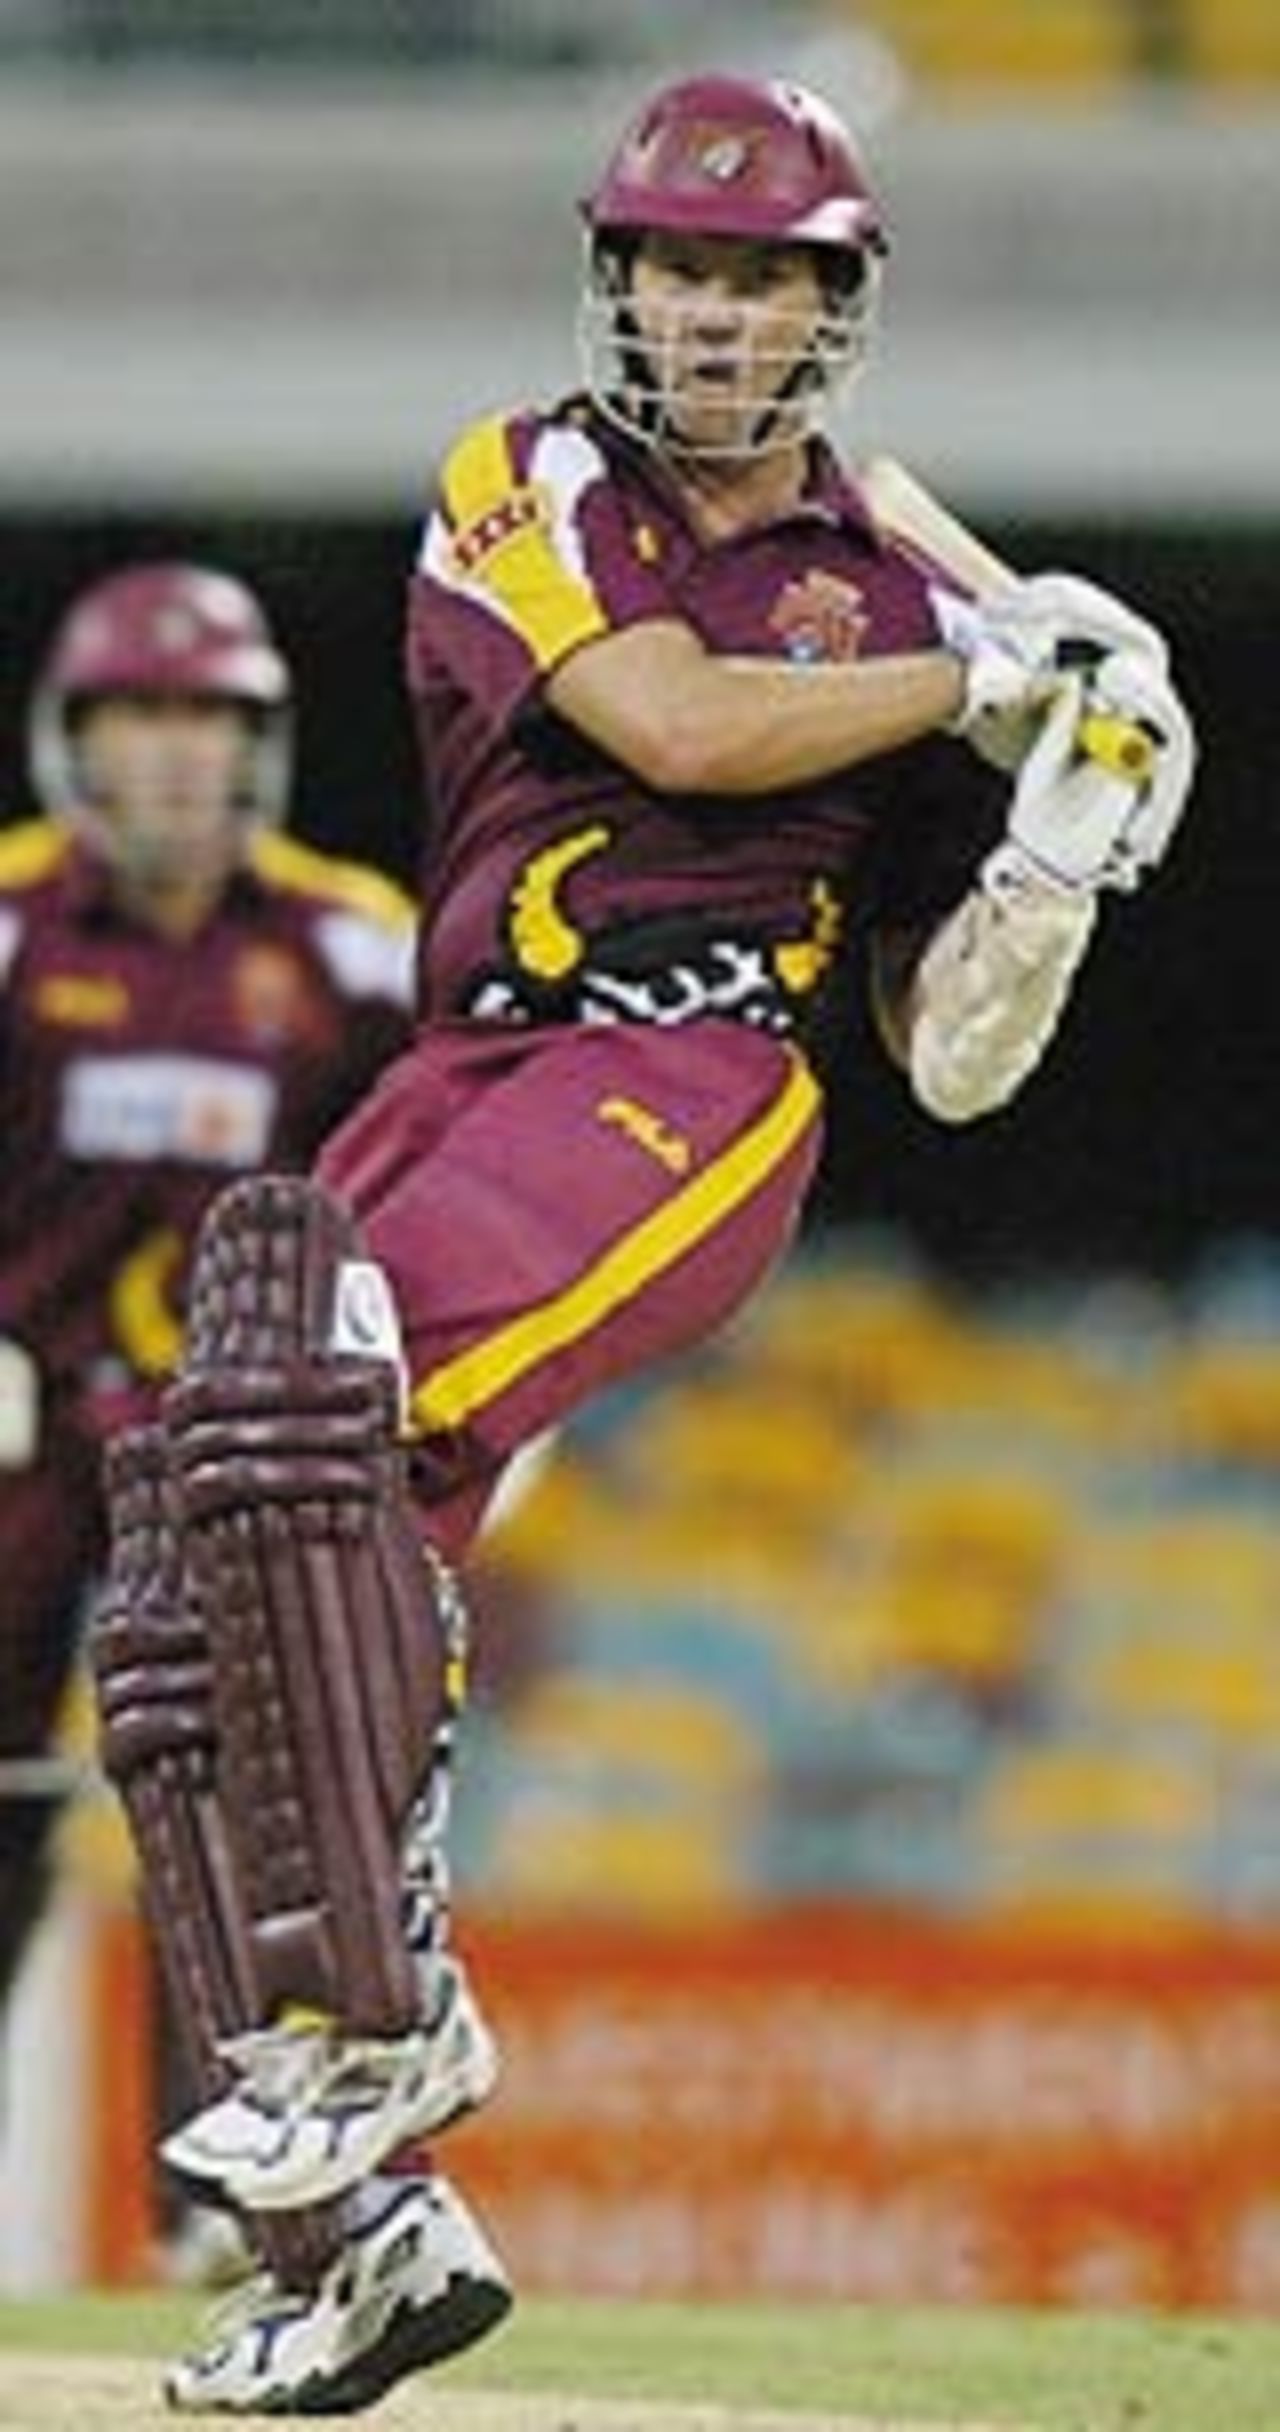 Stuart Law of the Bulls hits out, Queensland v New South Wales, Brisbane, January 30, 2004